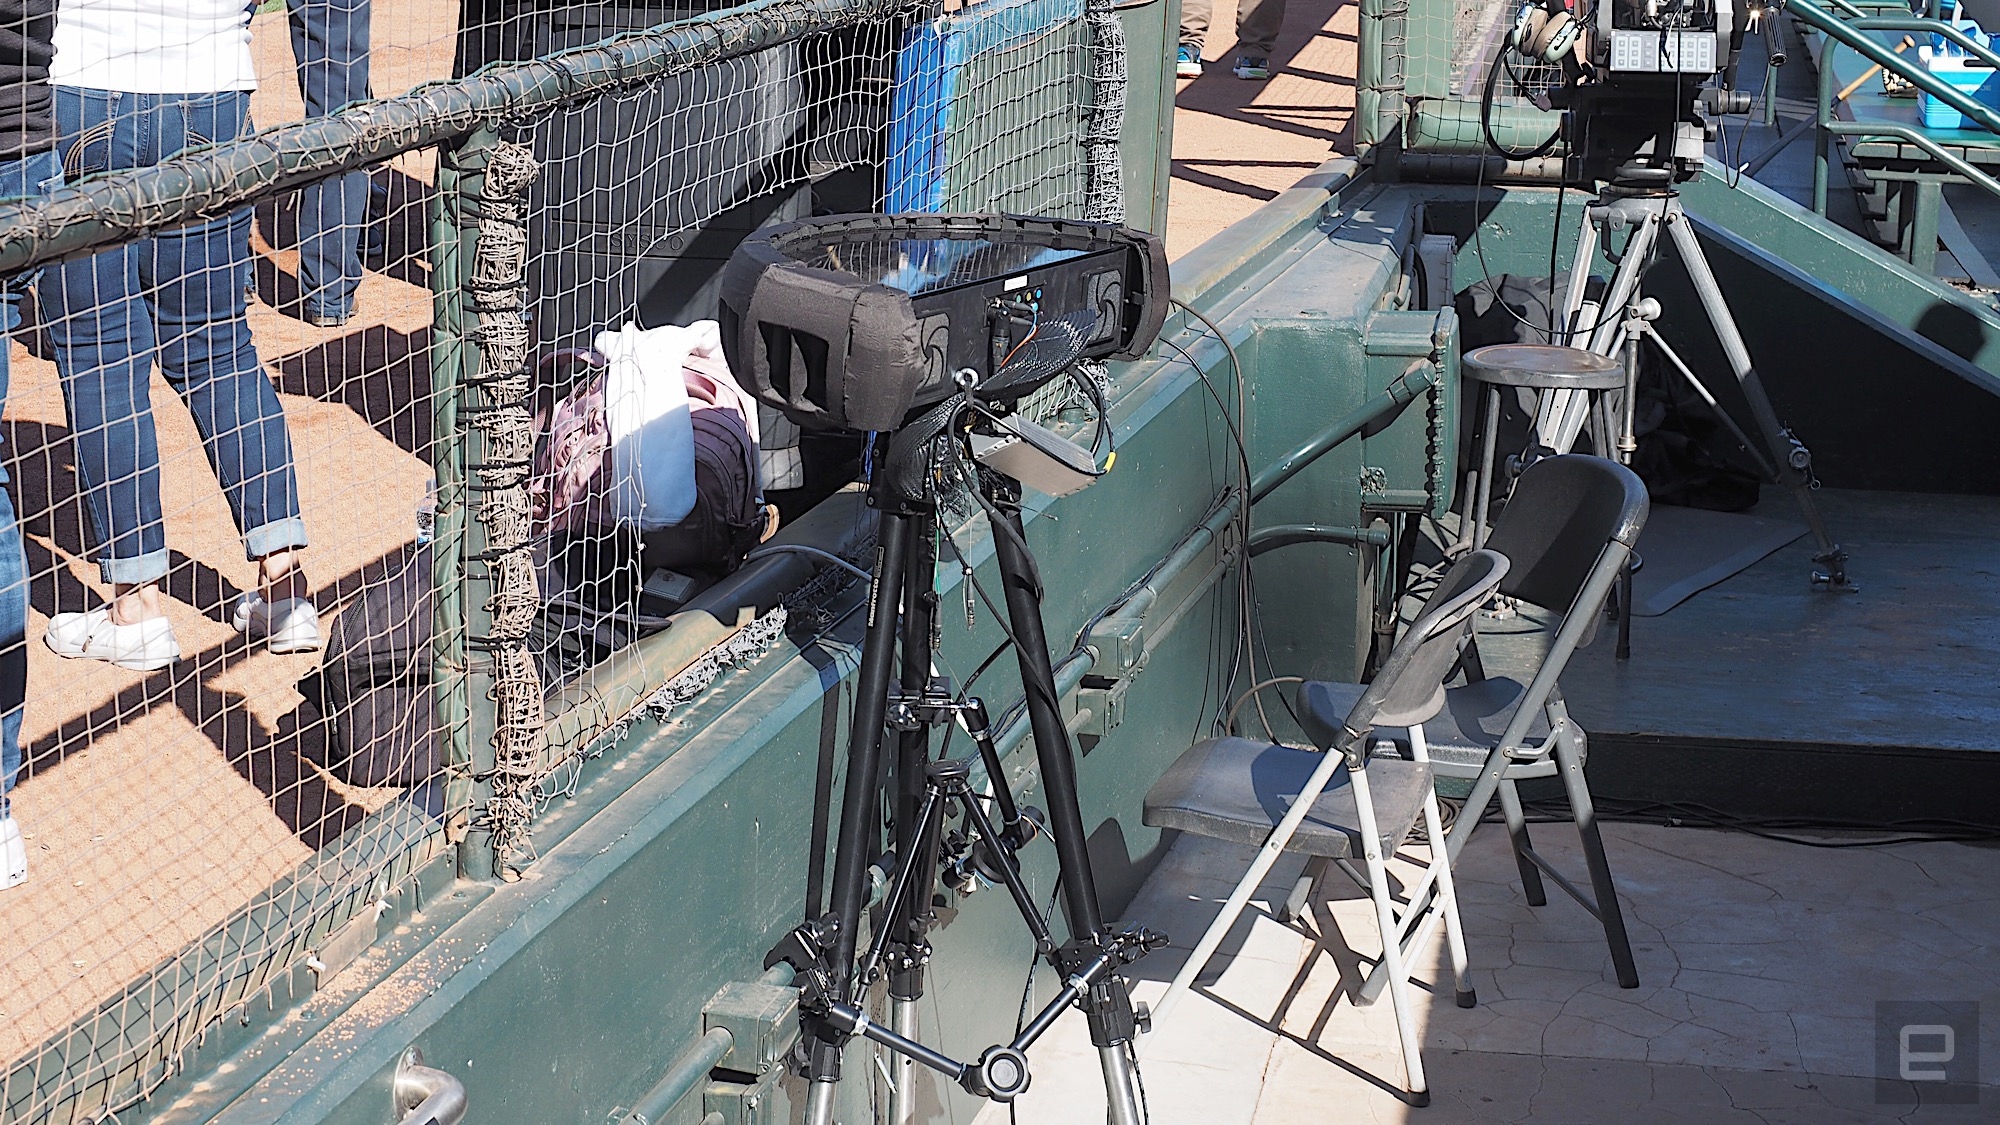 A behind-the-scenes look at how Intel broadcasts live baseball in VR | DeviceDaily.com